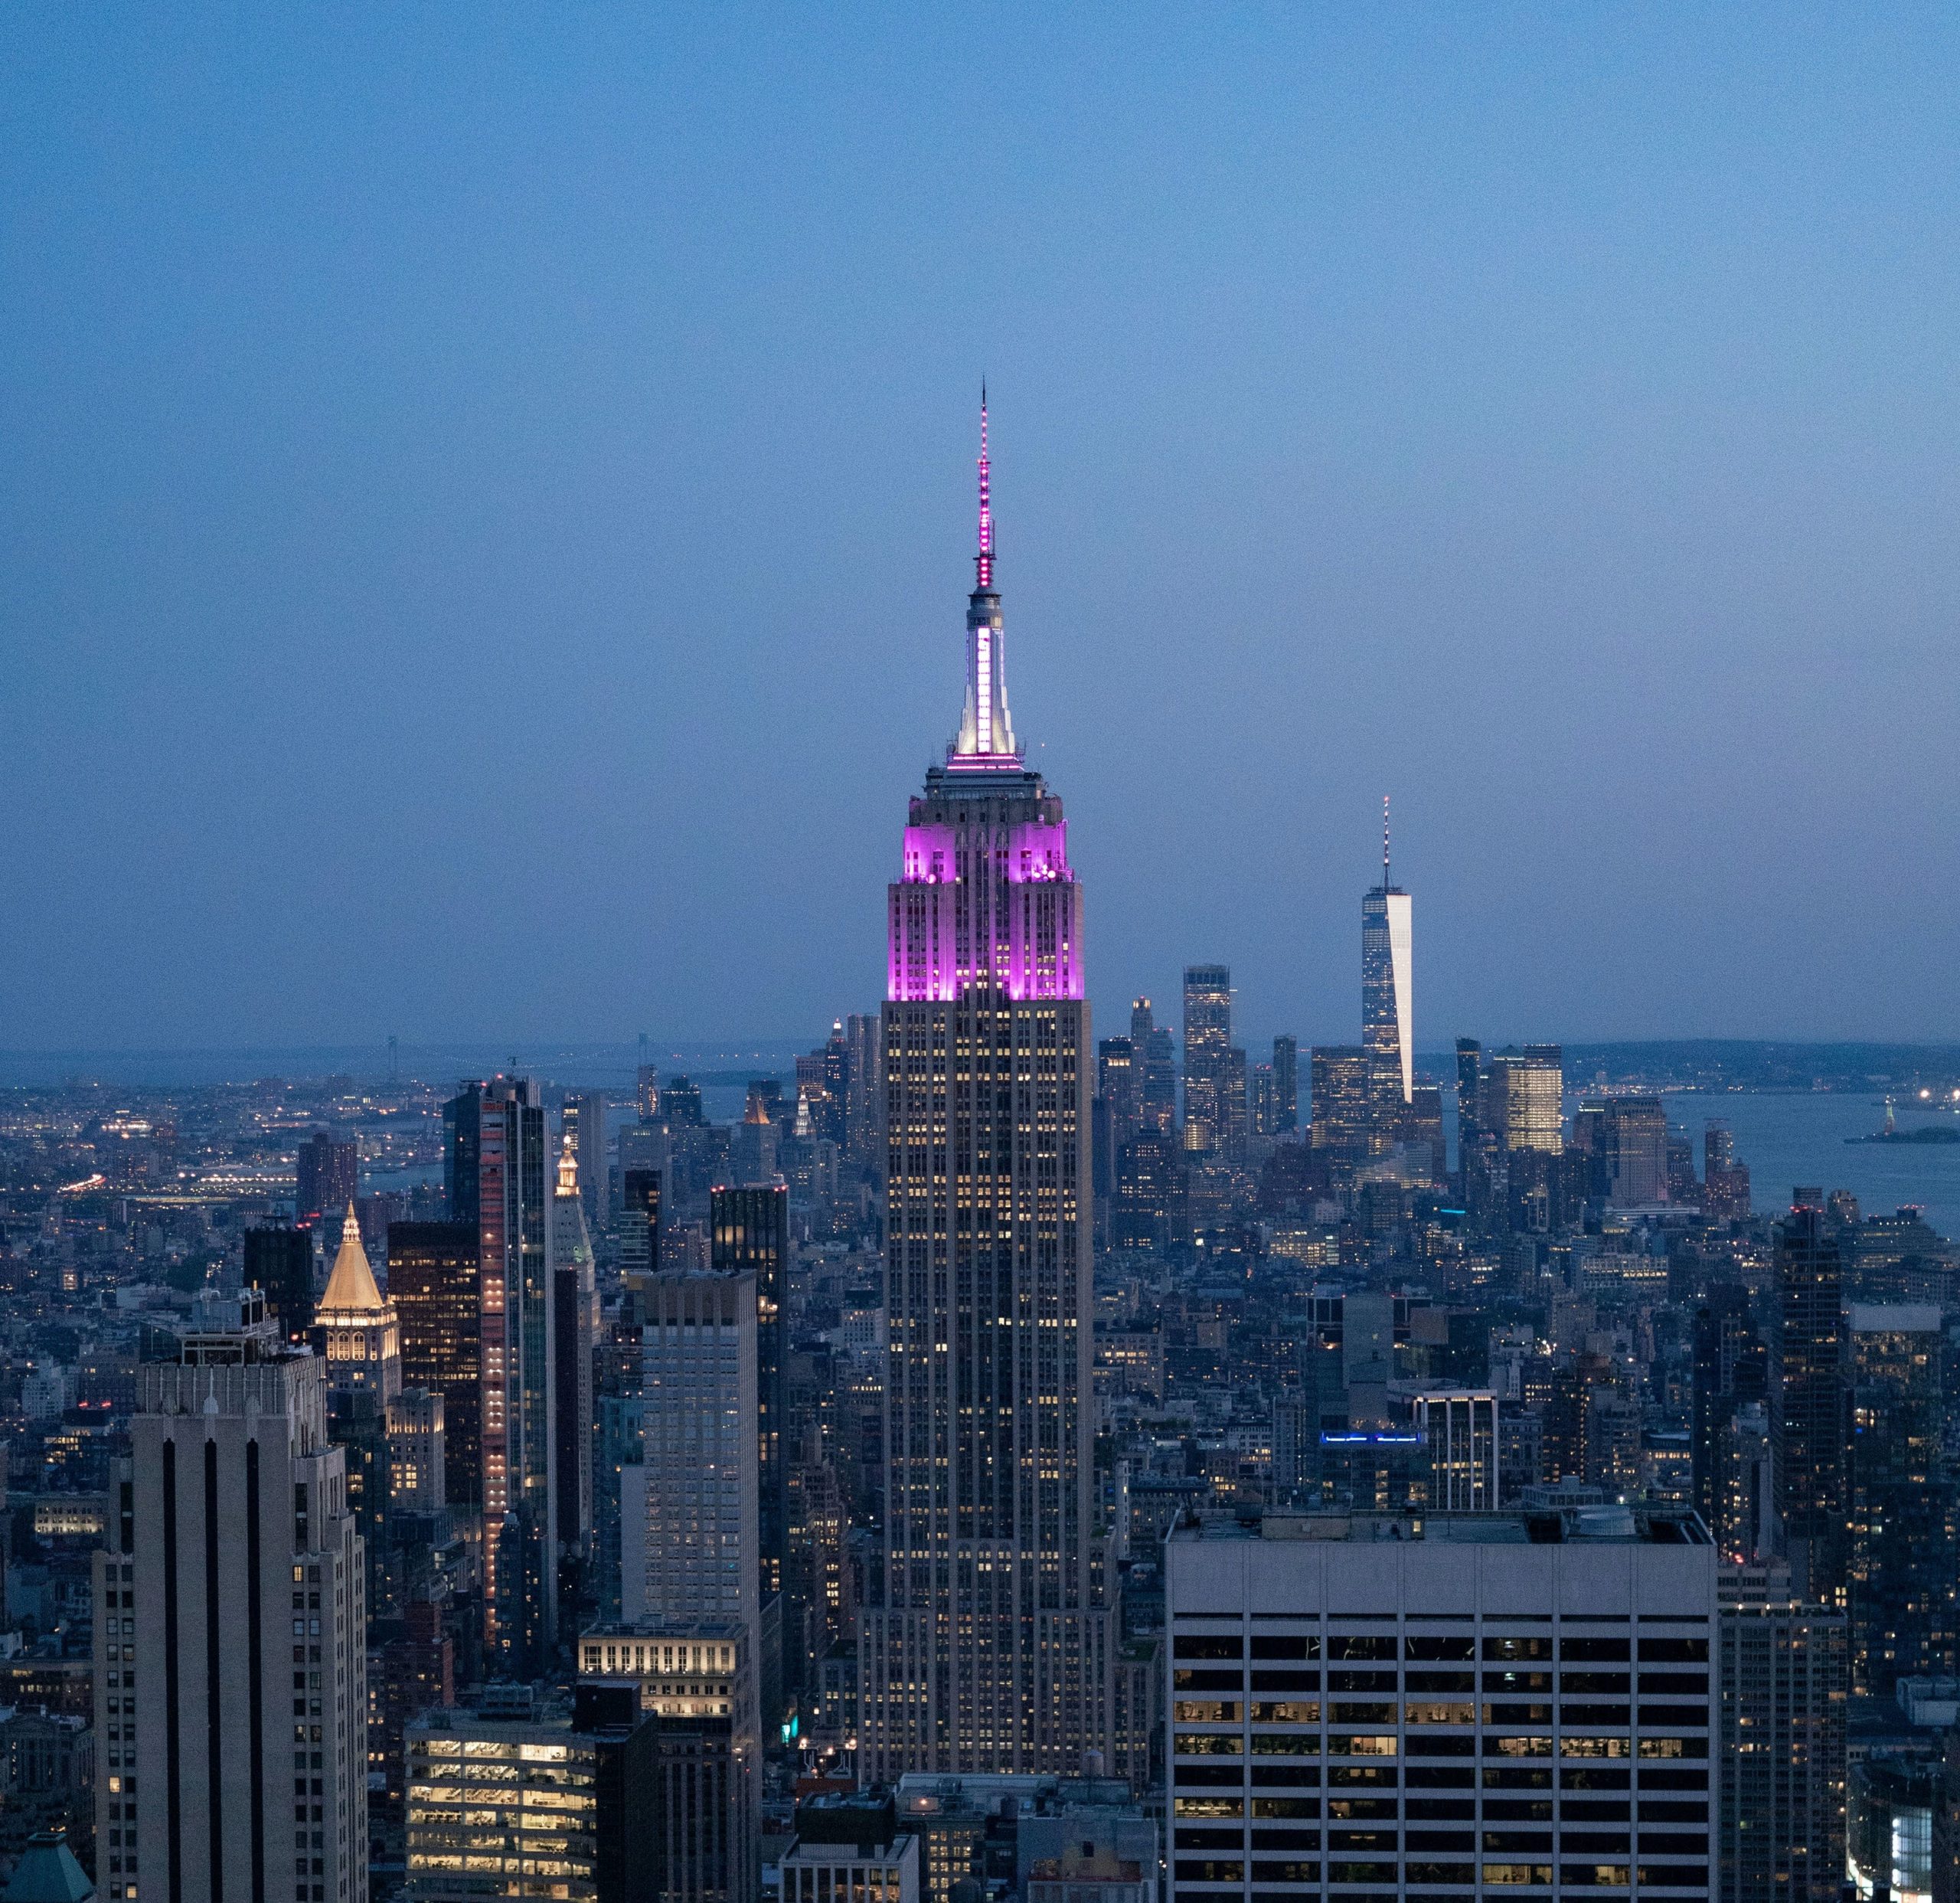 The Empire State Building lit up in purple for NYU graduates.